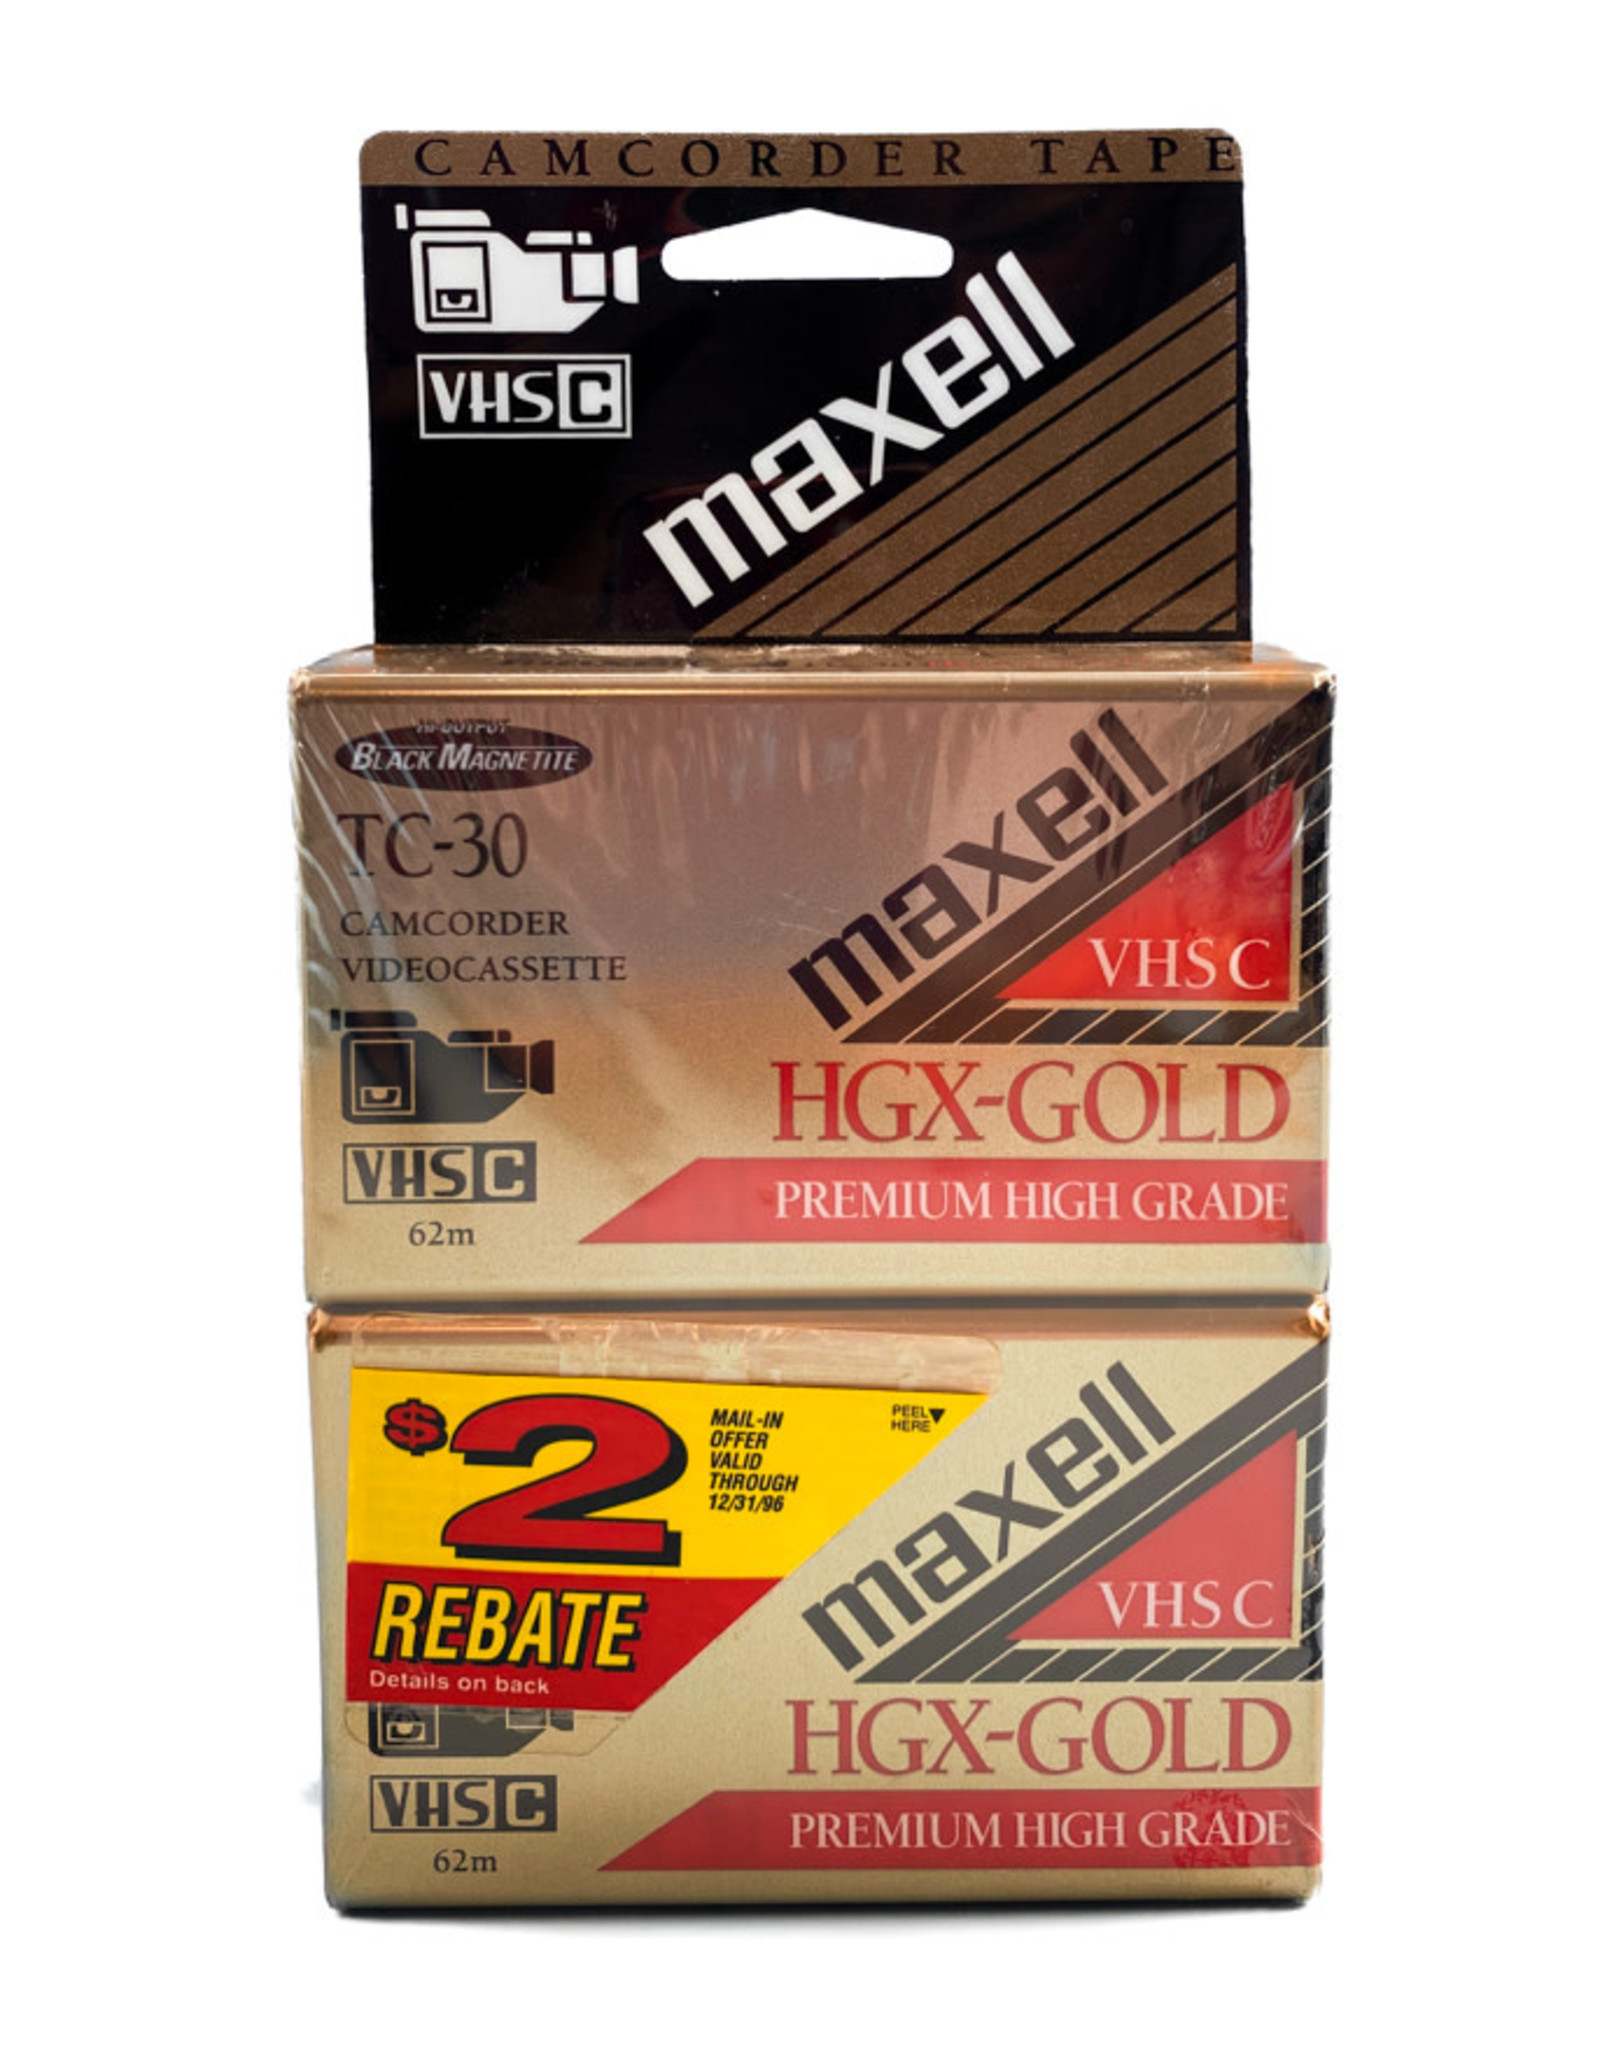 Maxell Maxell HGX-Gold TC-30 Camcorder Video Cassette, 2 Pack